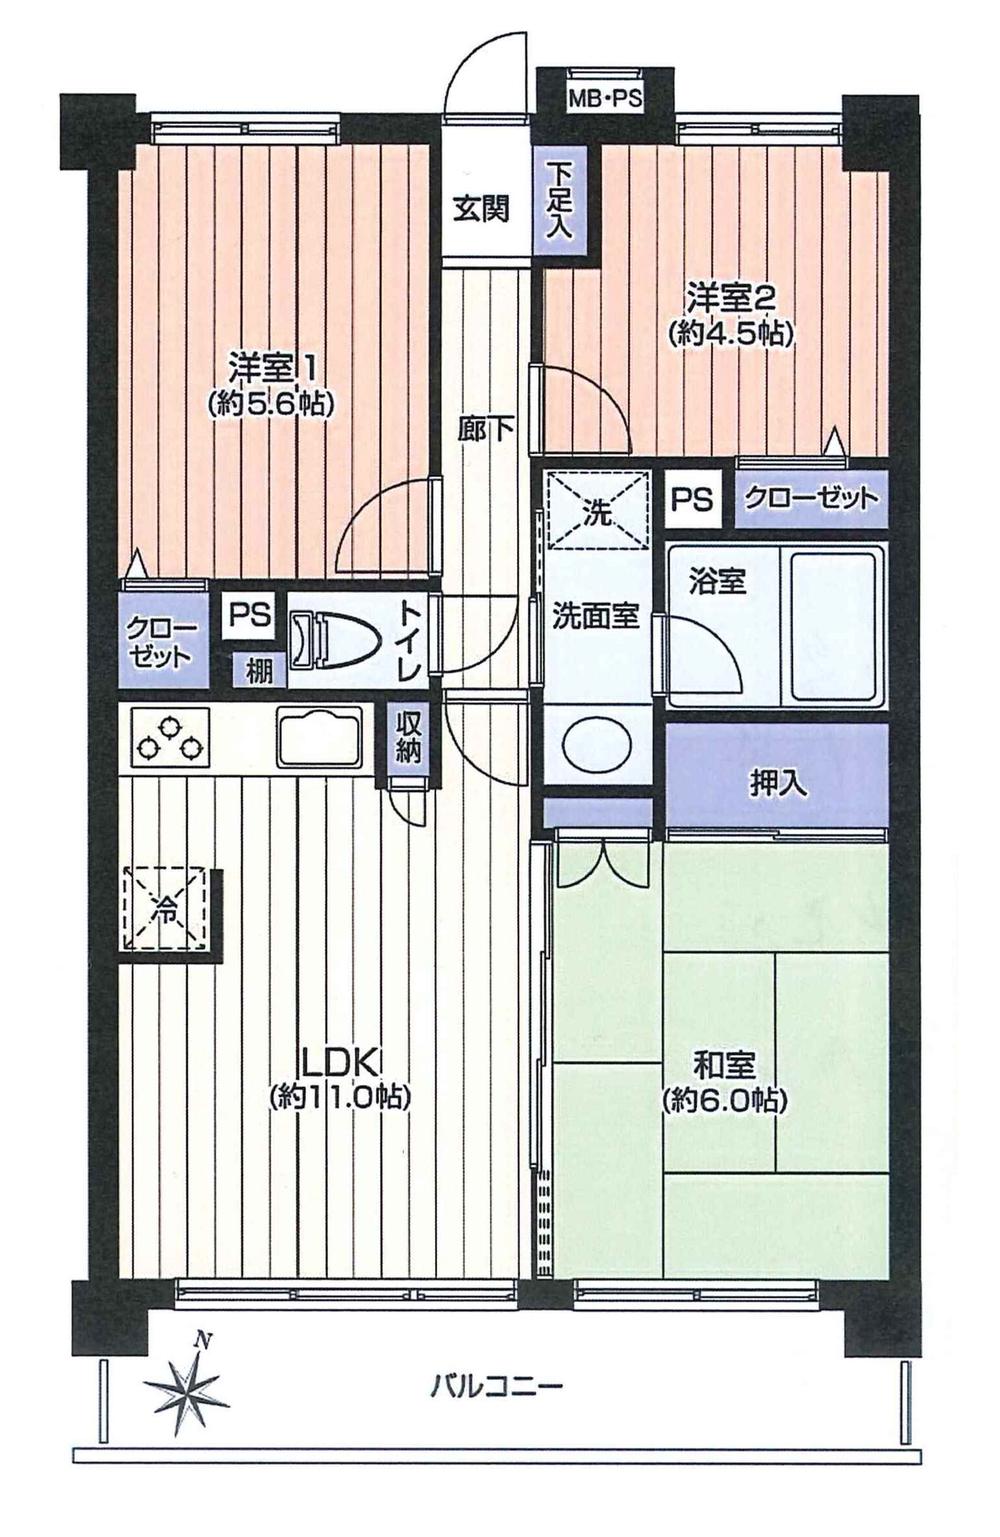 Floor plan. 3LDK, Price 26,800,000 yen, Occupied area 60.13 sq m , Day is a good property on the balcony area 8.94 sq m interior renovation completed! !